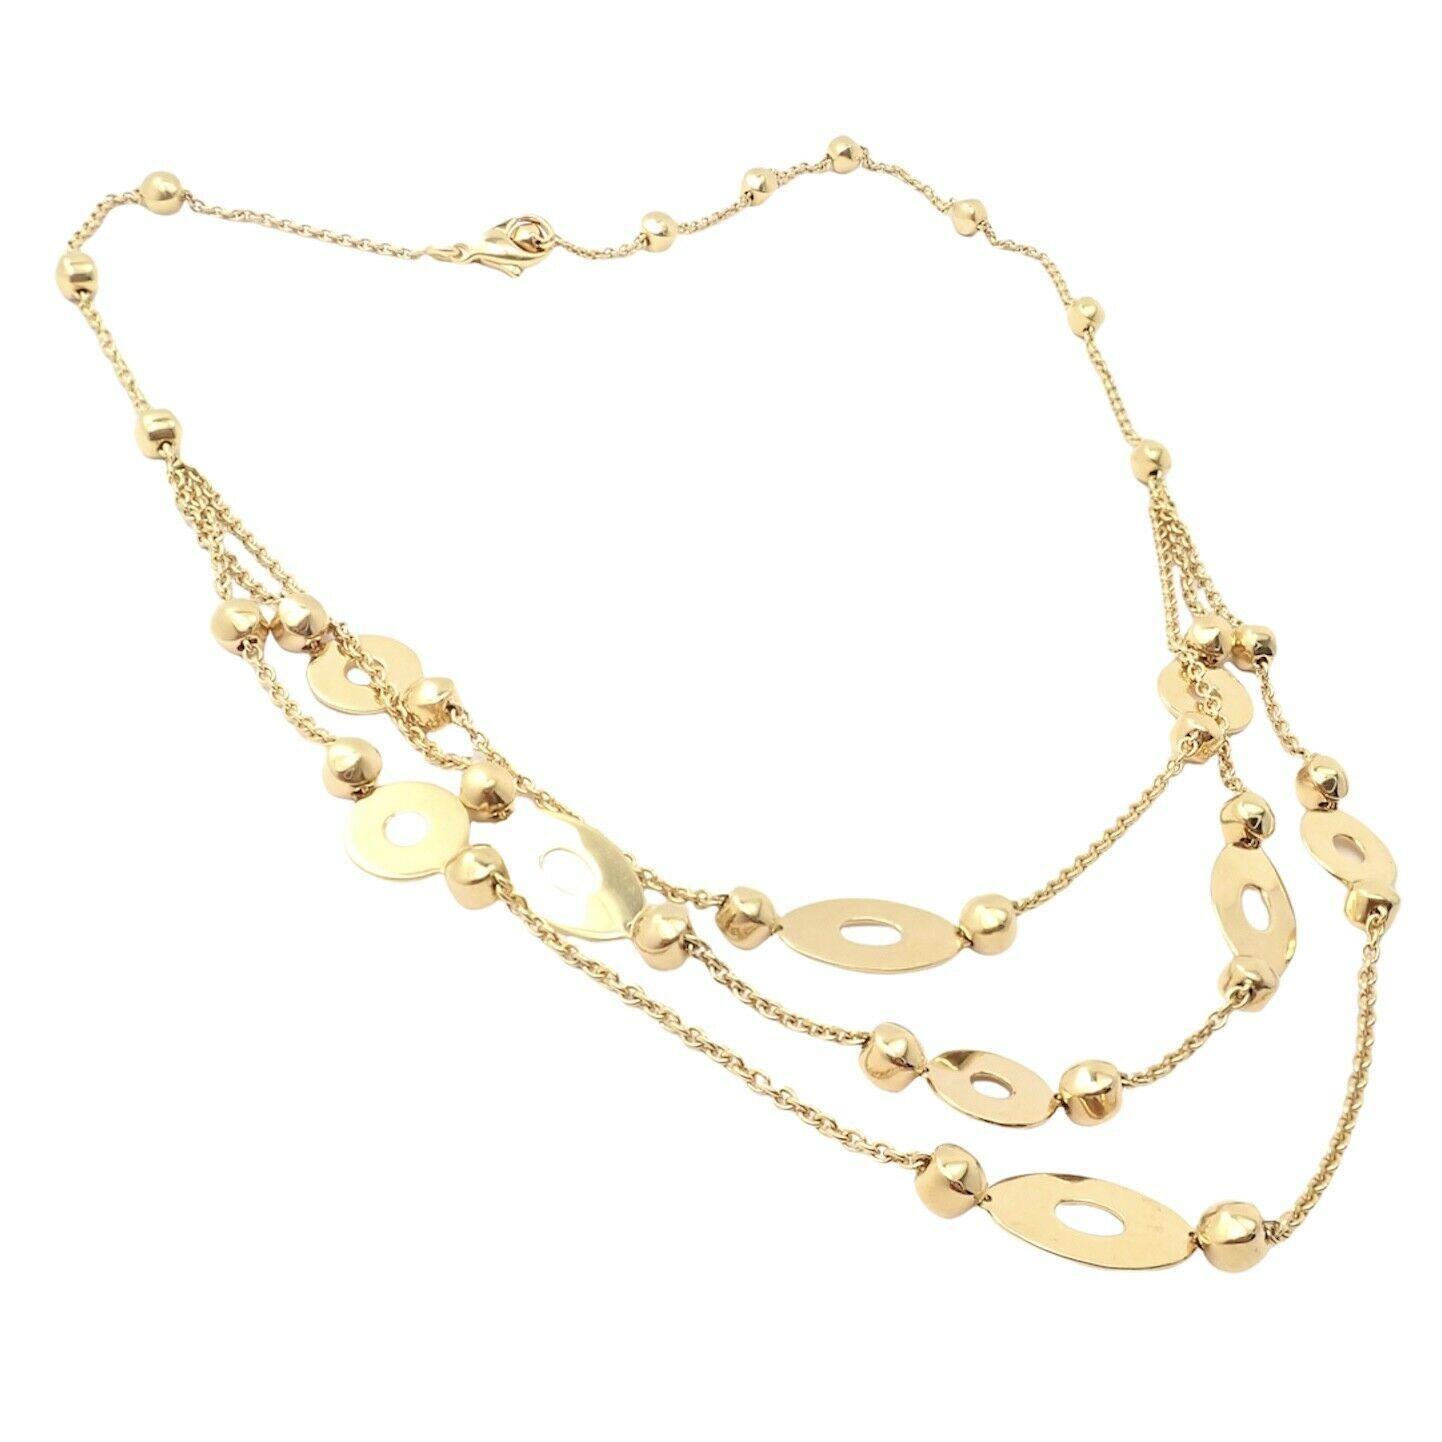 Bulgari Lucea Three Row Yellow Gold Necklace In Excellent Condition For Sale In Holland, PA